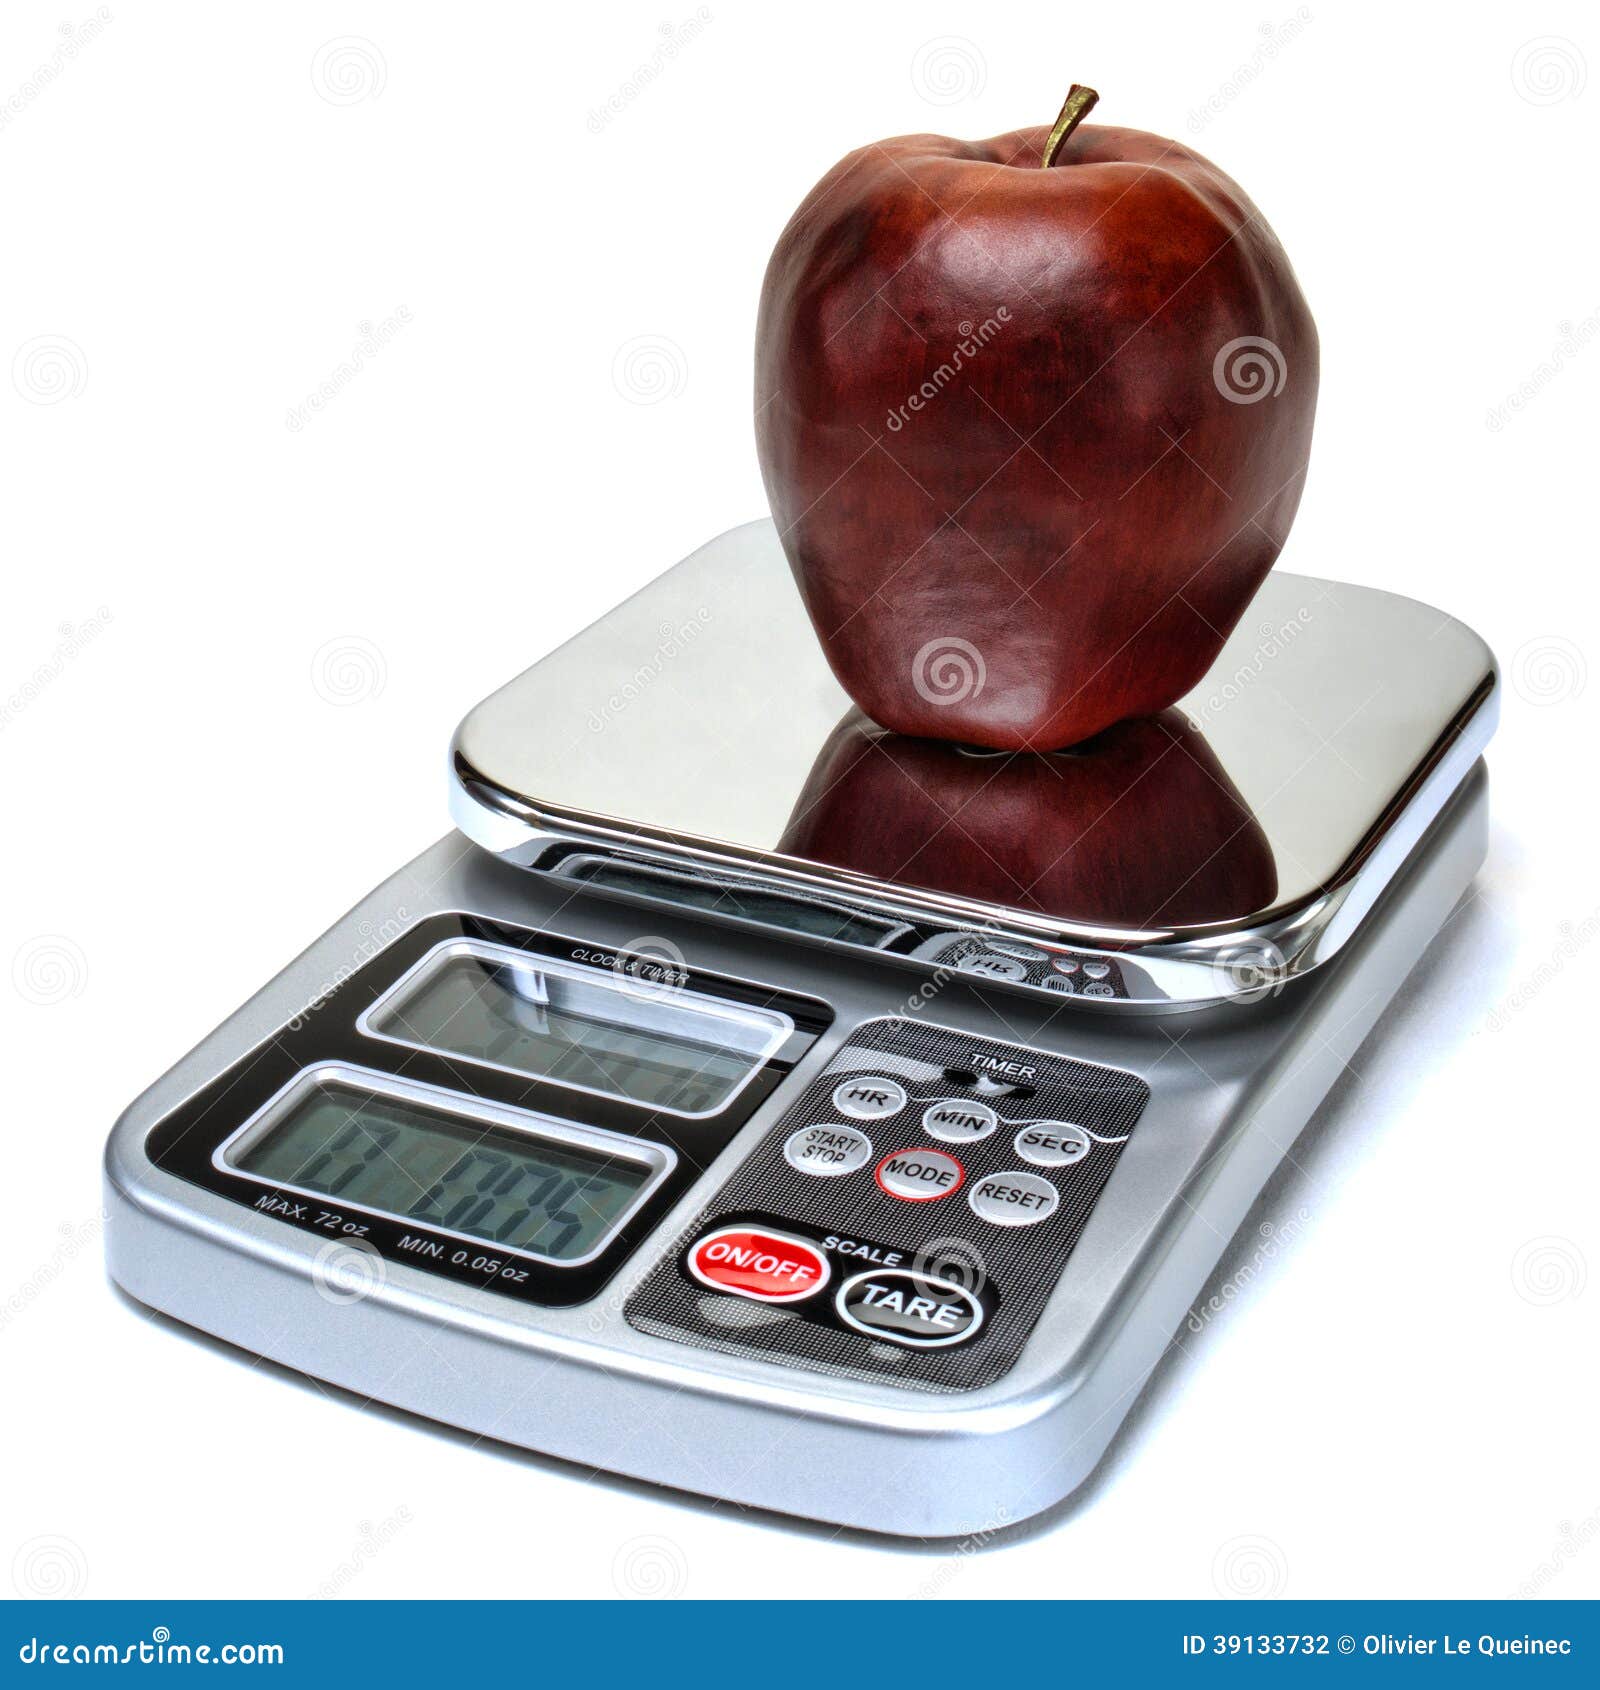 https://thumbs.dreamstime.com/z/apple-fruit-scale-calorie-counting-diet-healthy-red-precision-kitchen-balance-to-measure-weight-precise-calories-39133732.jpg